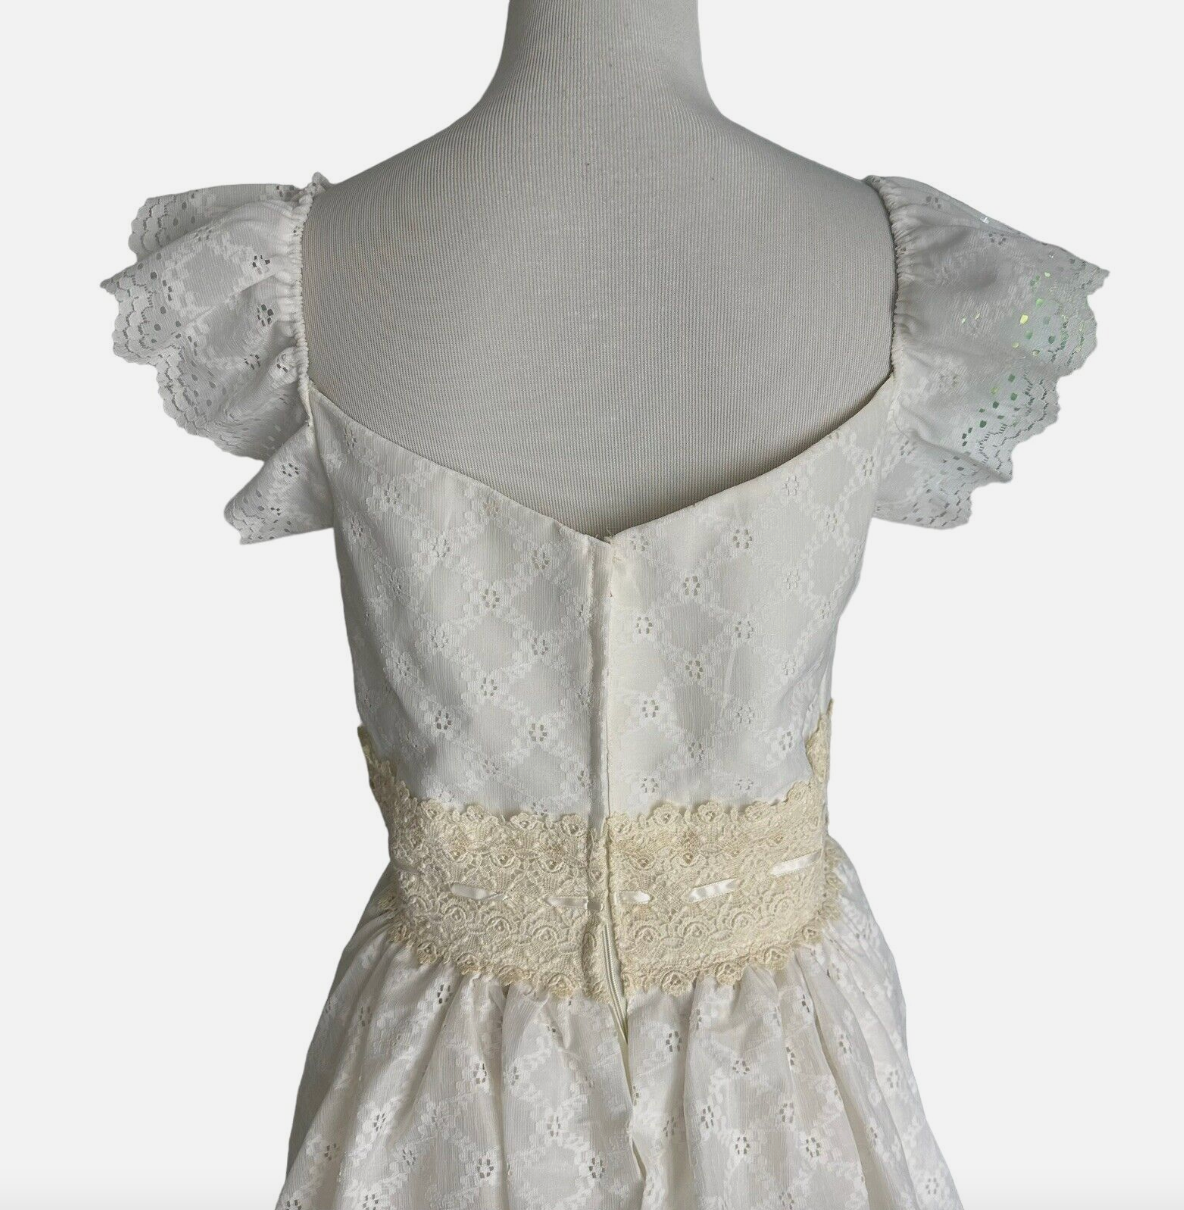 1960’s Off Shoulder Eyelet Gown w/ Ruffle Train